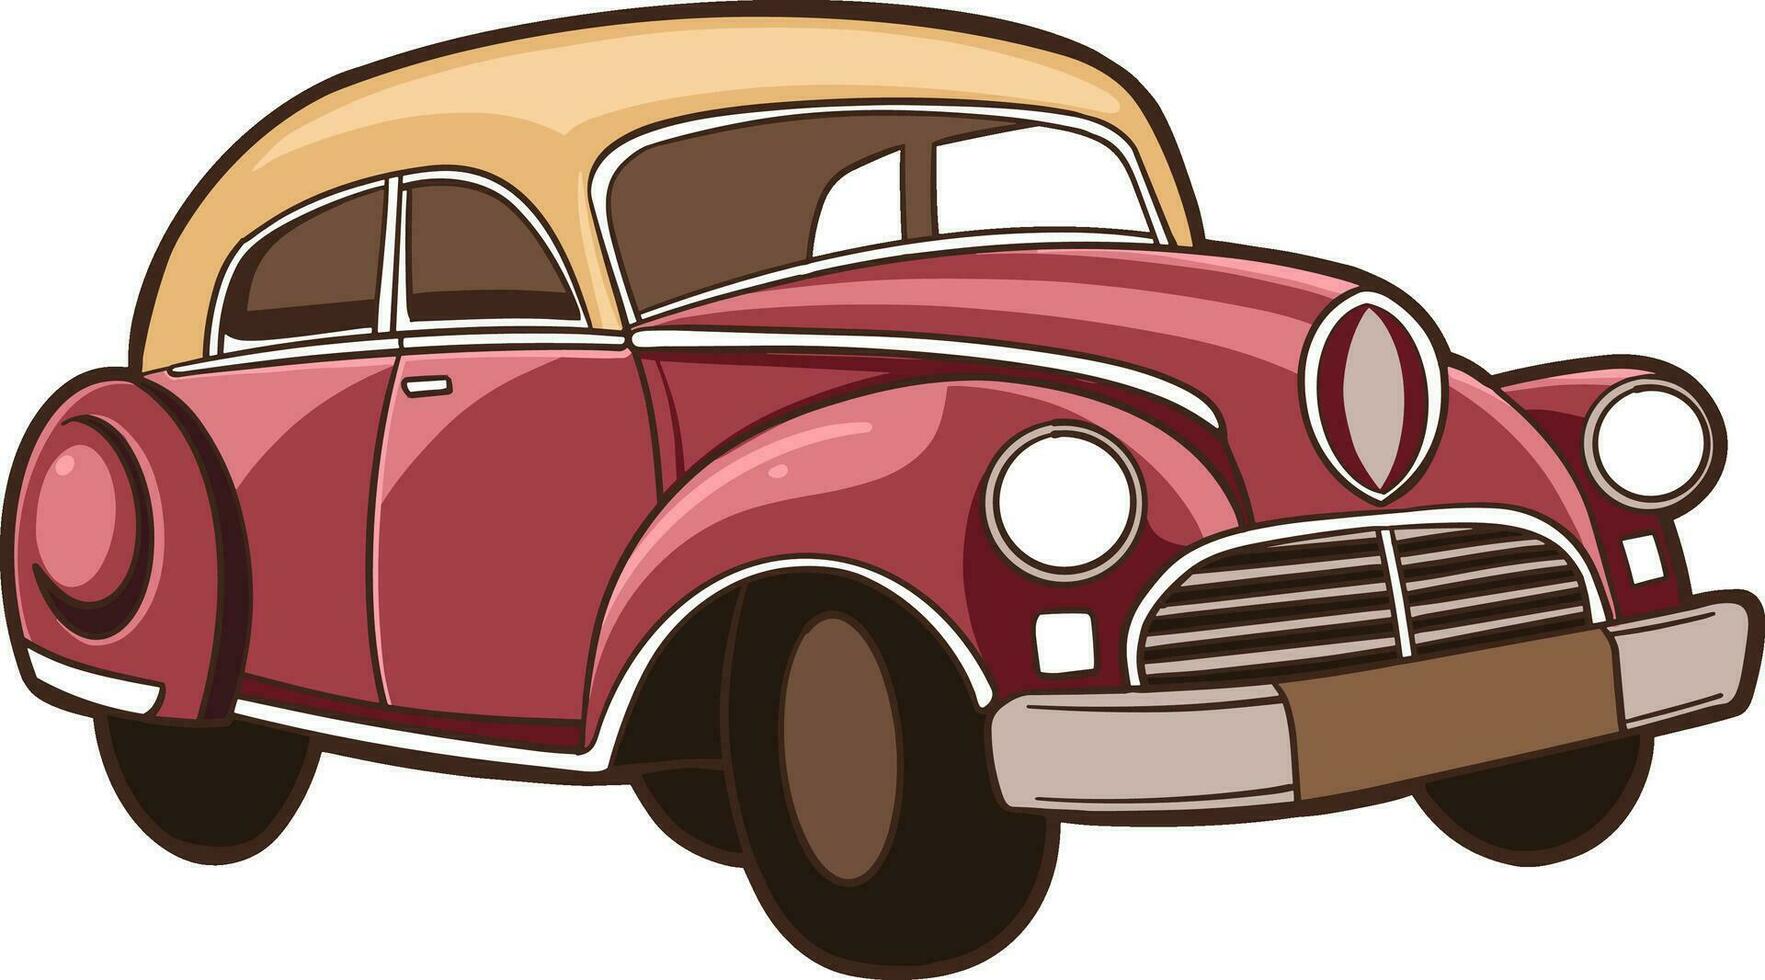 vintage car classic style vehicle vector